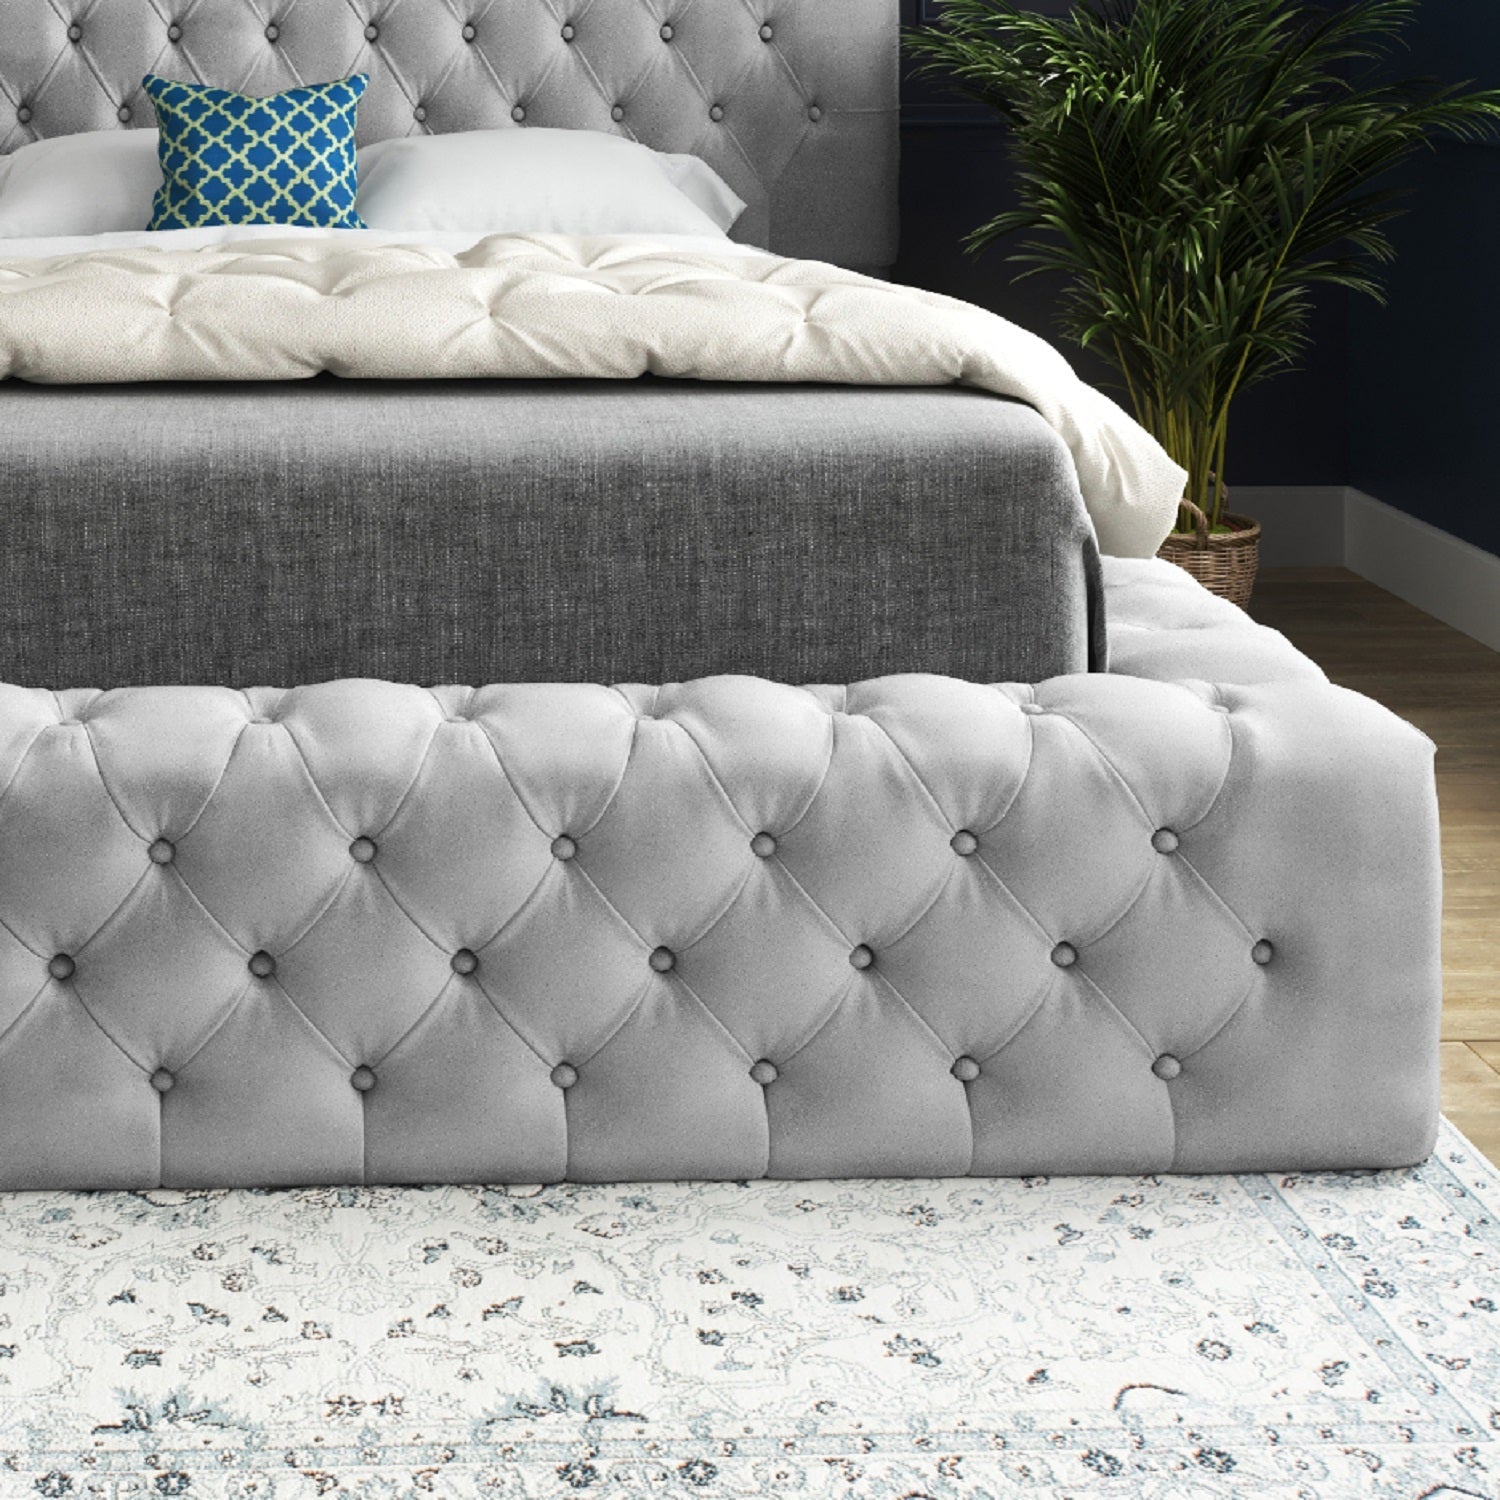 Grand Milan Pleated Upholstery Bed Frame